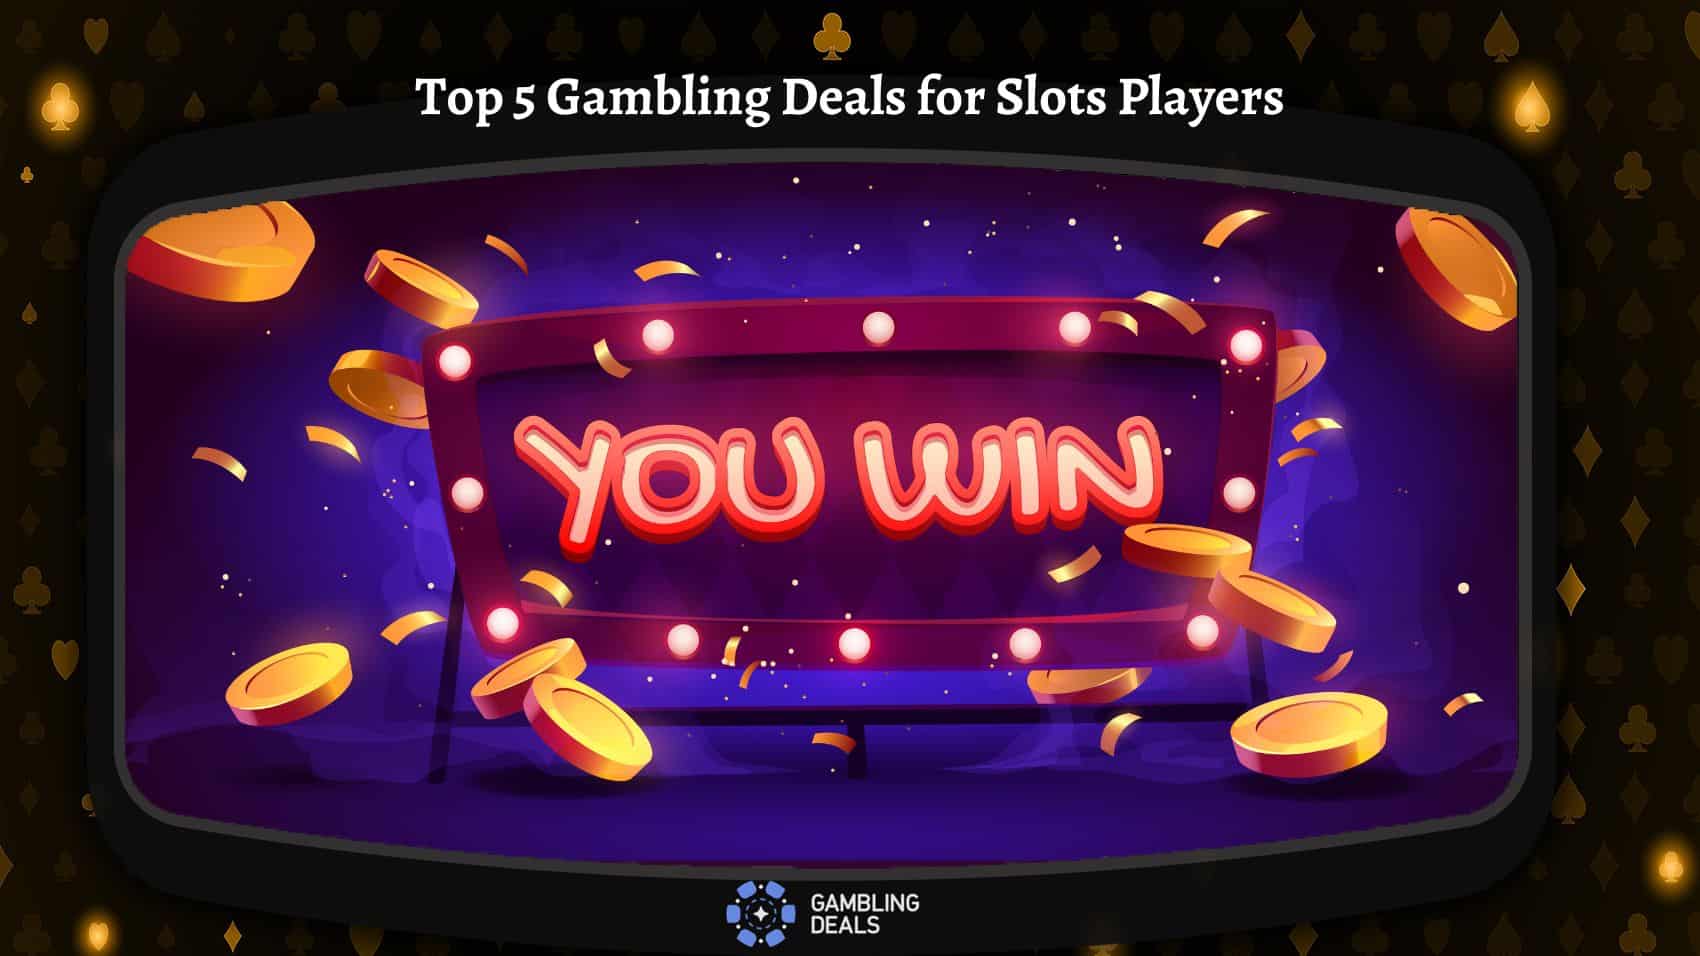 Top 5 Gambling Deals for Slots Players